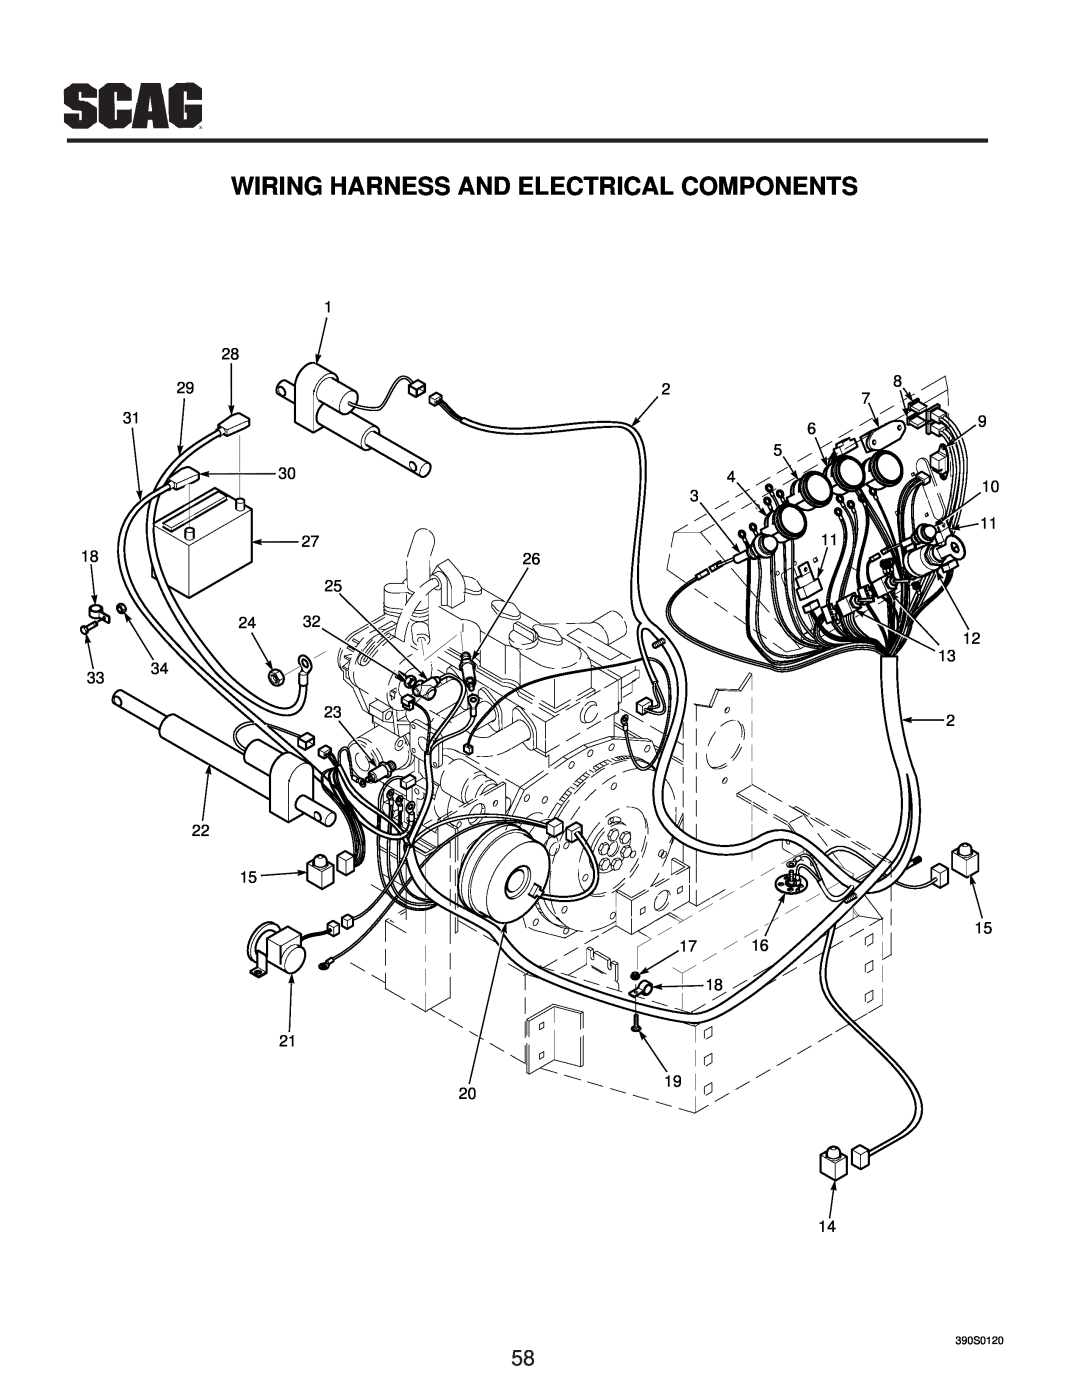 Scag Power Equipment MAG manual Wiring Harness And Electrical Components, 390S0120 